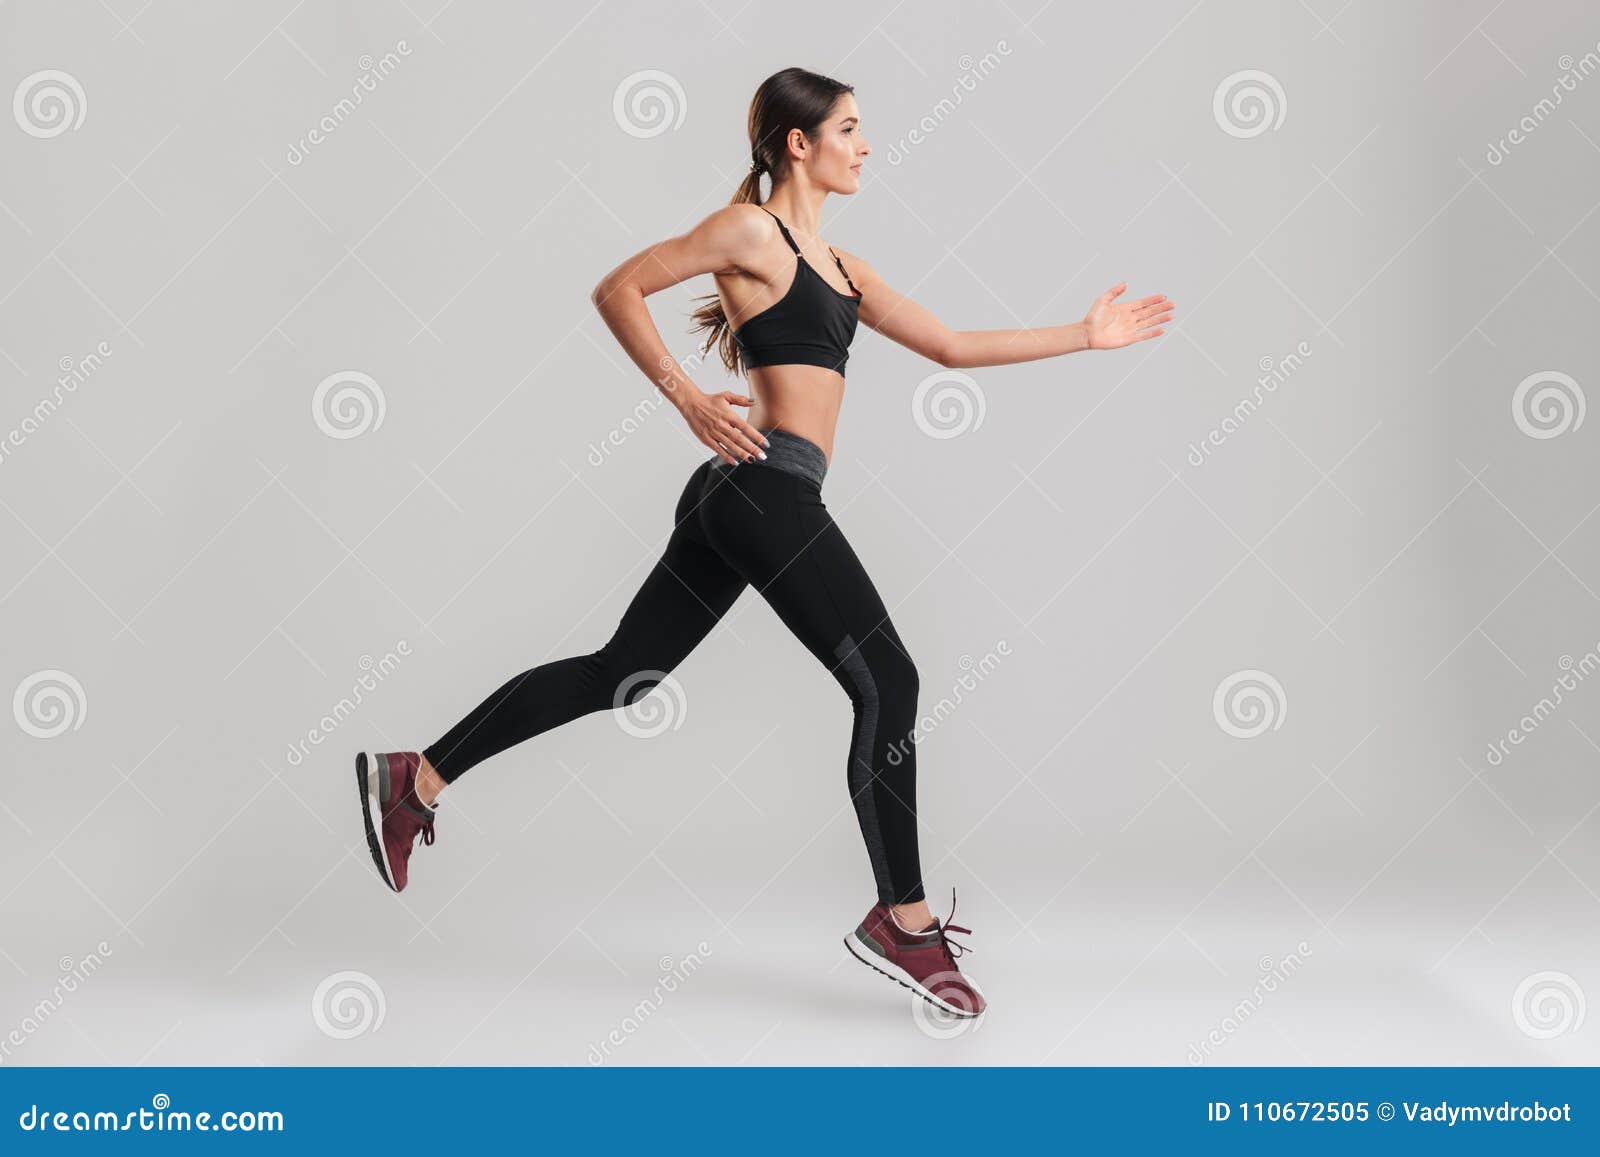 6,200 Outfit Jogging Stock Photos - Free & Royalty-Free Stock Photos from  Dreamstime